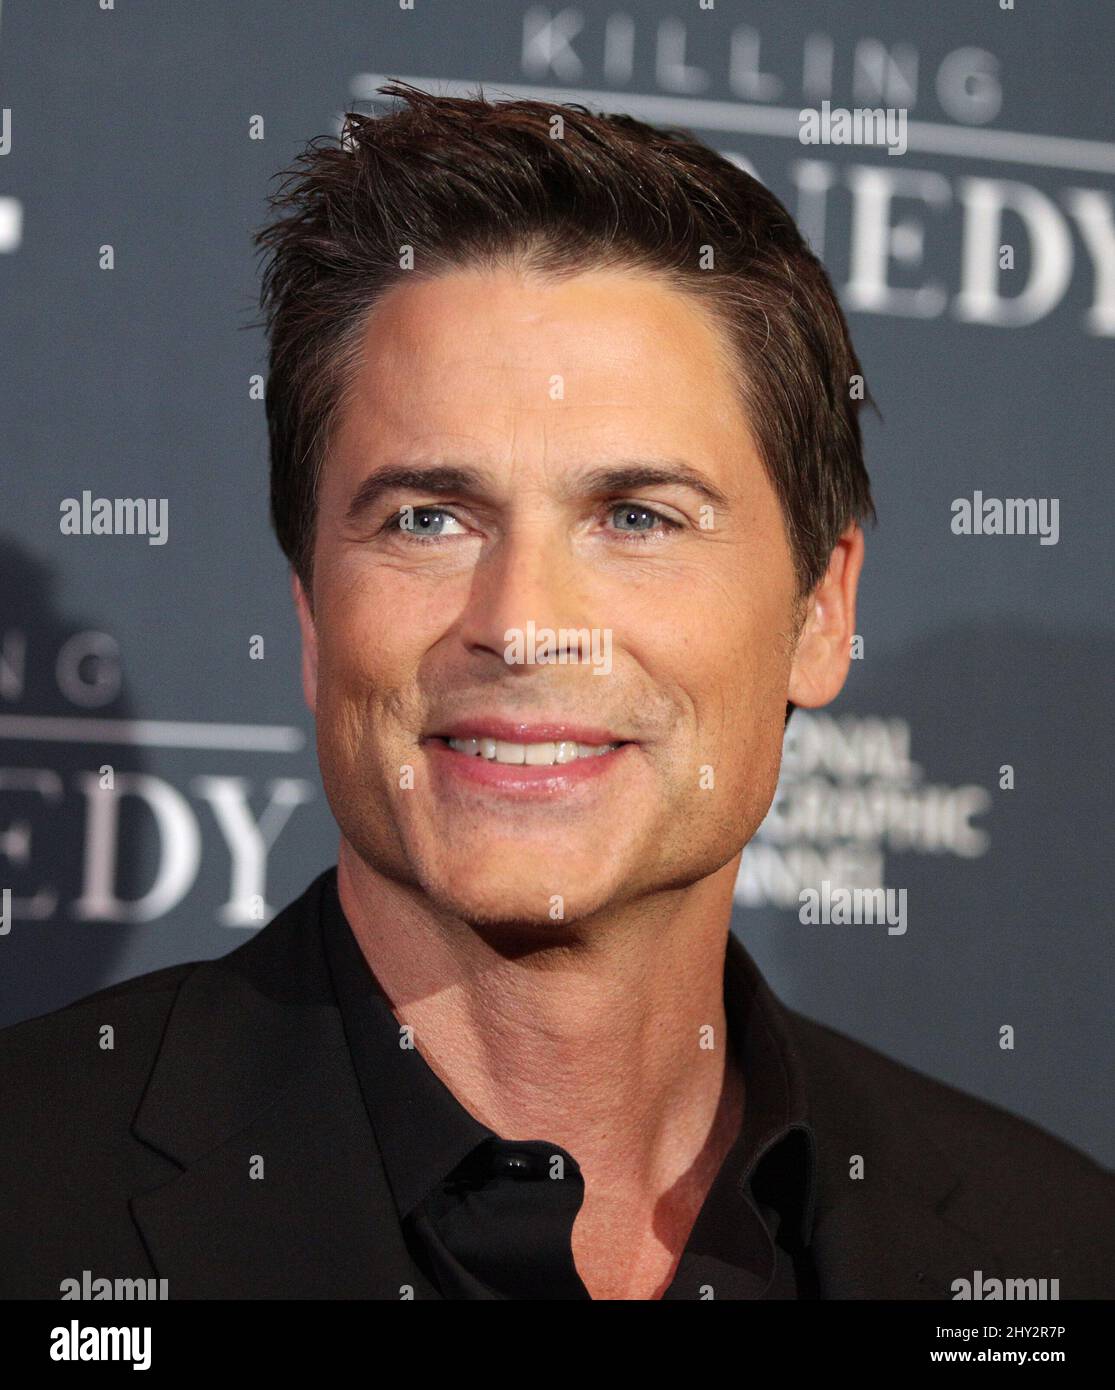 Rob Lowe attends the 'Killing Kennedy' Premiere in Los Angeles Stock Photo